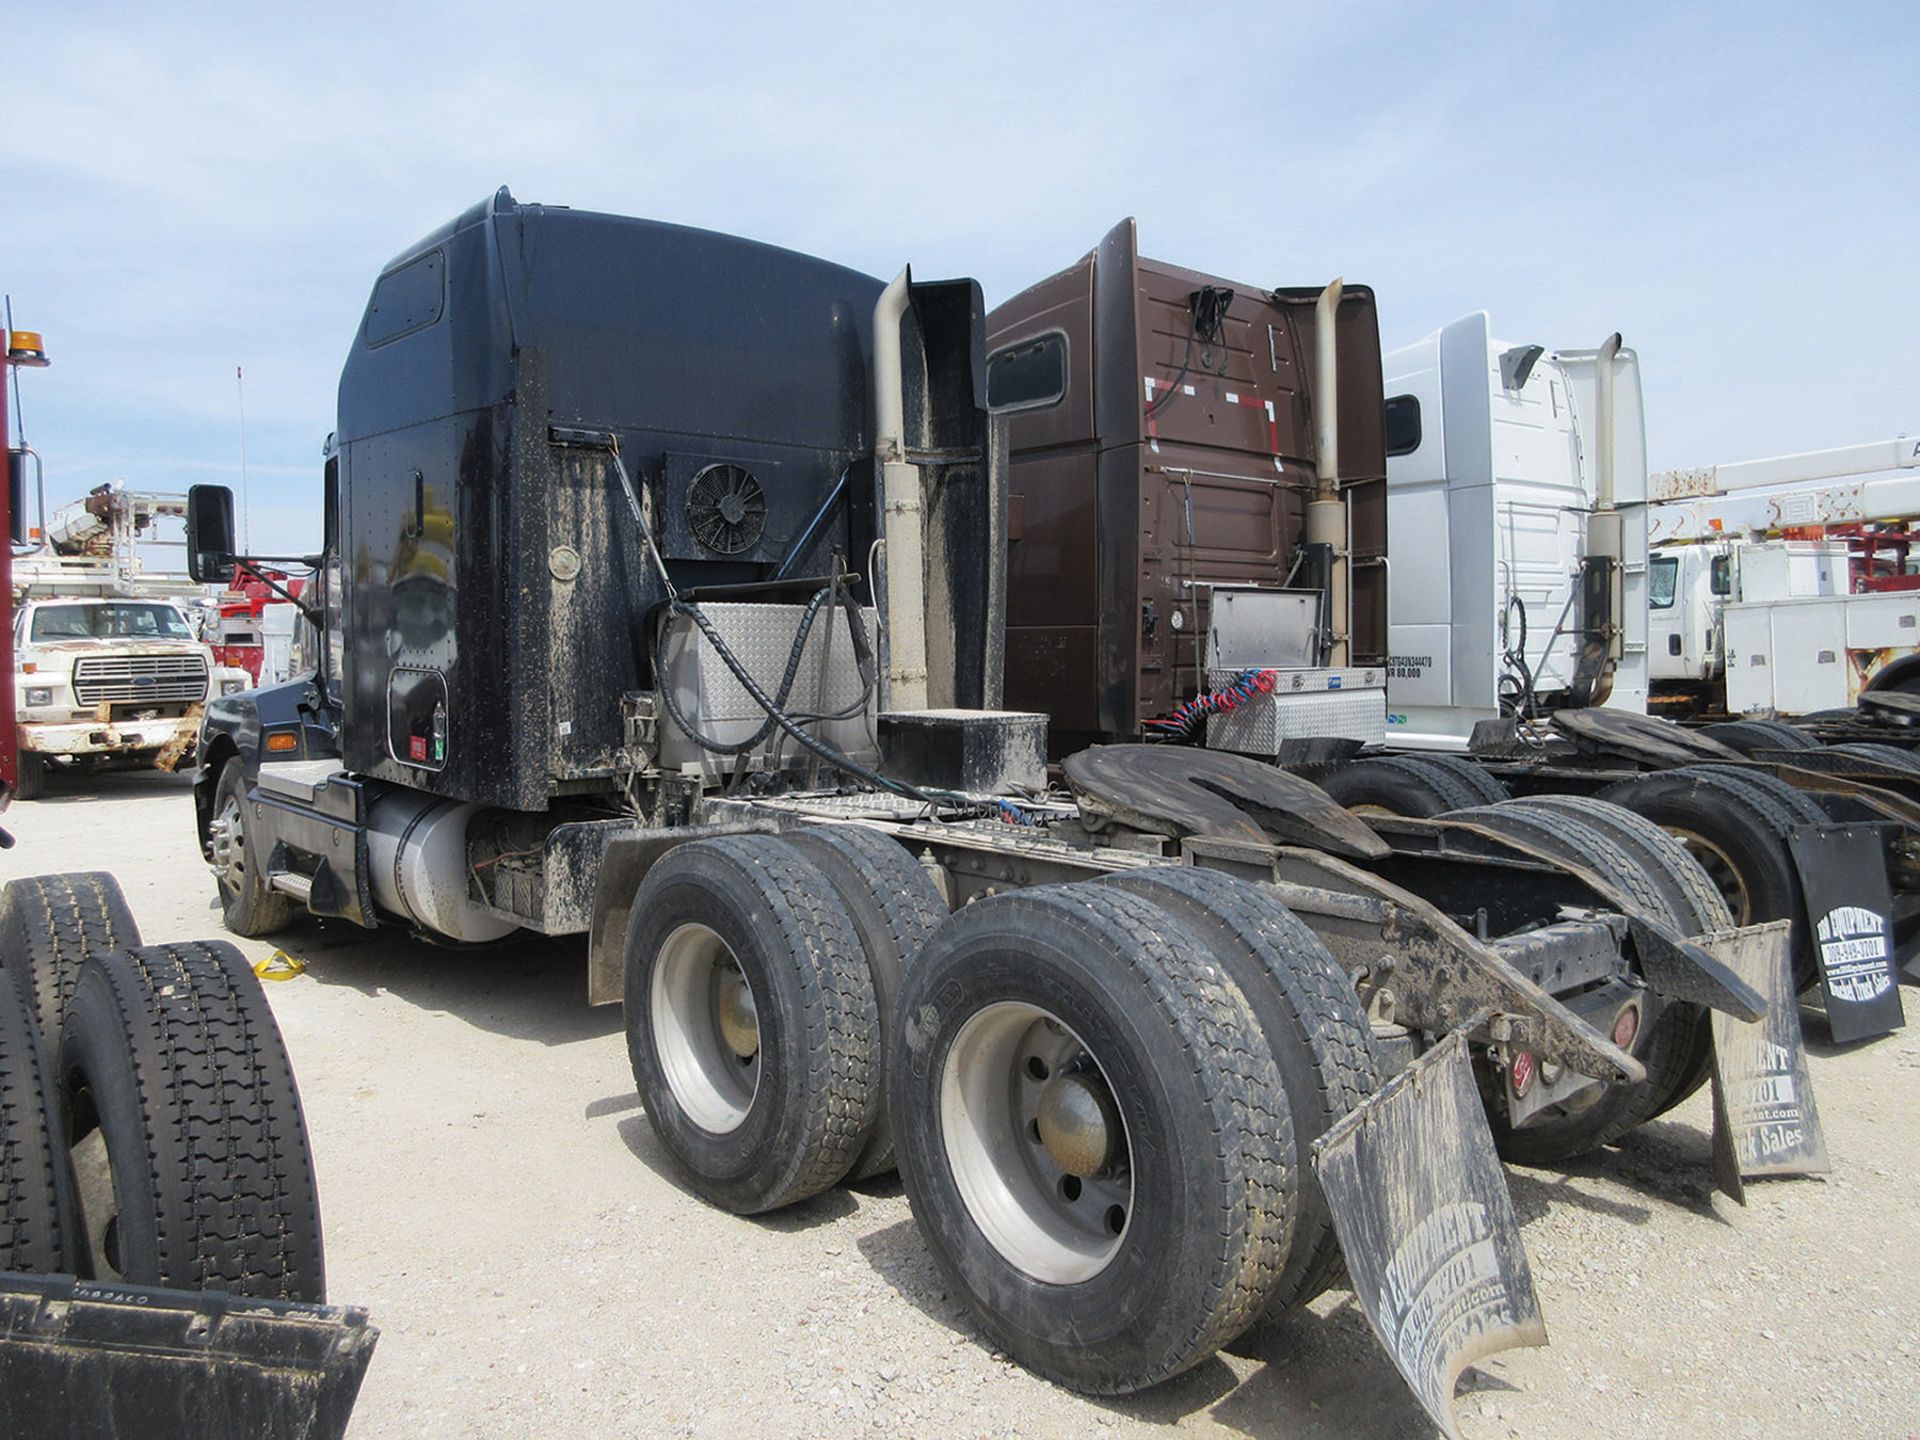 2005 KENWORTH T600 T/A TWIN SCREW ROAD TRACTOR W/SLEEPER CAB, CHASSIS VIN 1XKAD49X65J088199, EATON - Image 2 of 3